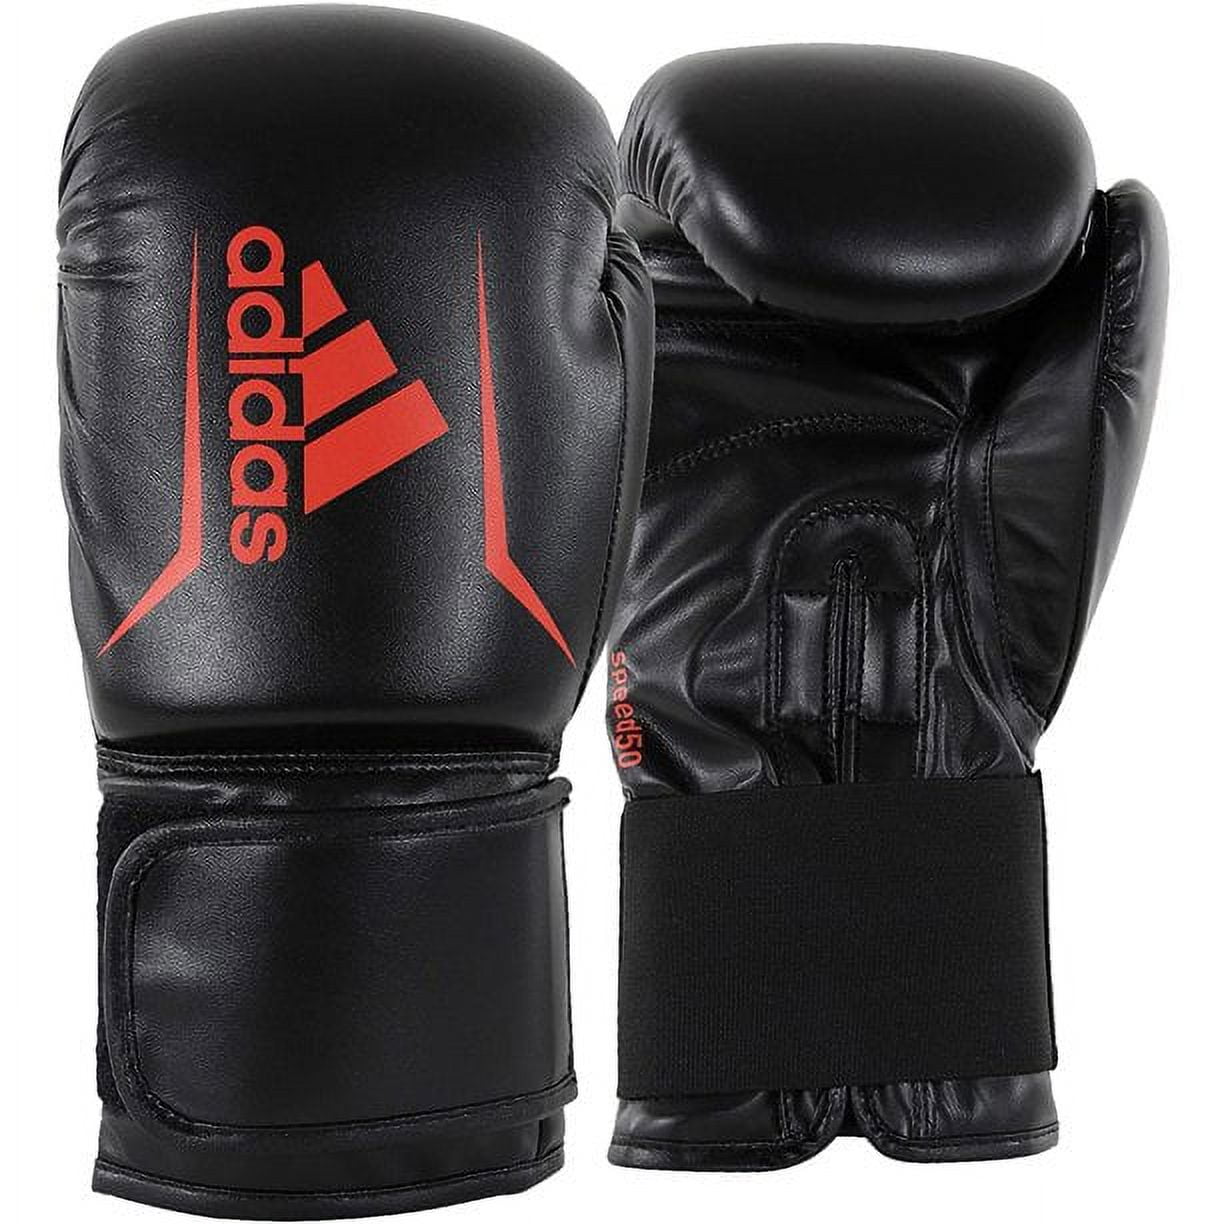 Light & Women 10oz adidas Heavy Speed Gloves 50 and 3.0 Gym, Fitness Sparring, Training, for FLX Bags. and Punching, for White,Gold Kickboxing Boxing Men